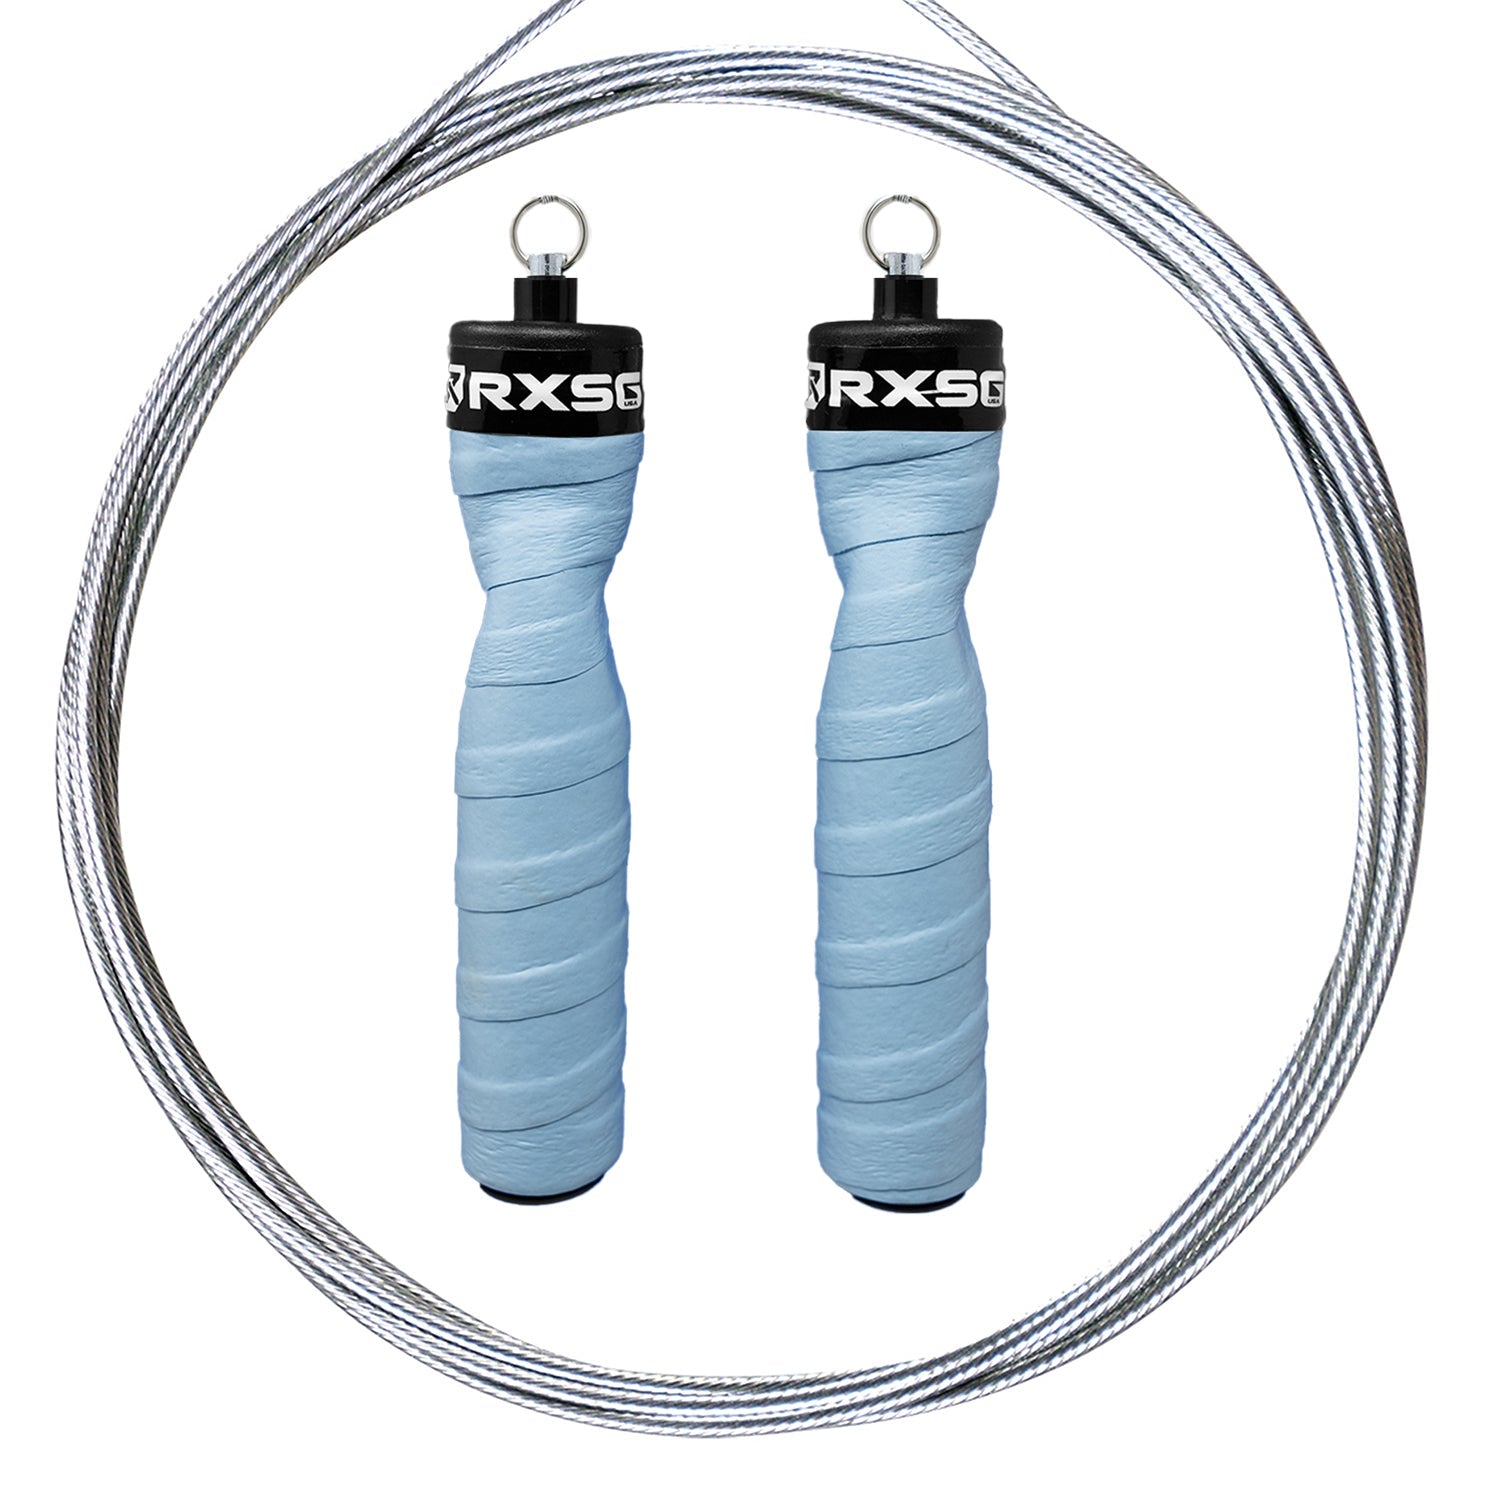 CustomFit Skye Jump Rope with speed metal cable